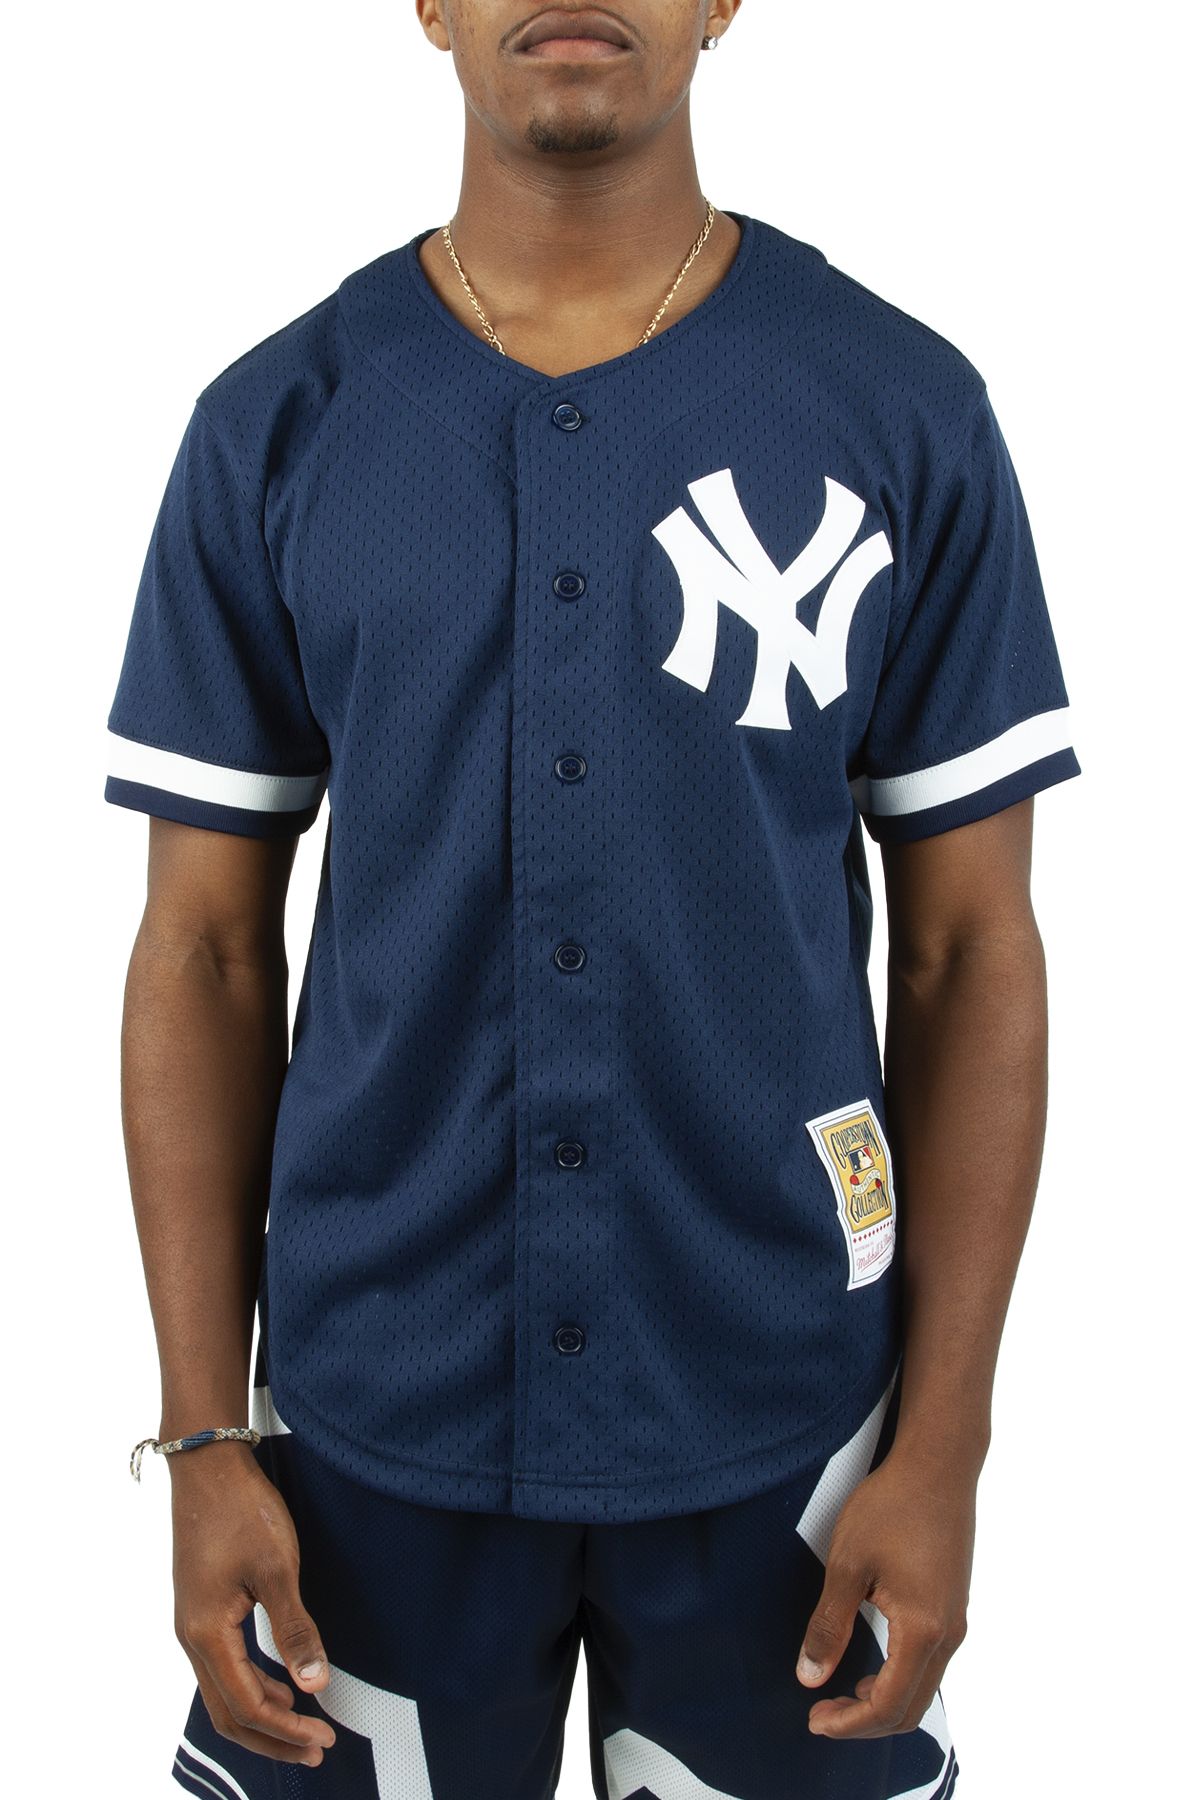 Reggie Jackson New York Yankees Mitchell & Ness Cooperstown Collection Mesh  Batting Practice Button-Up Jersey - Navy